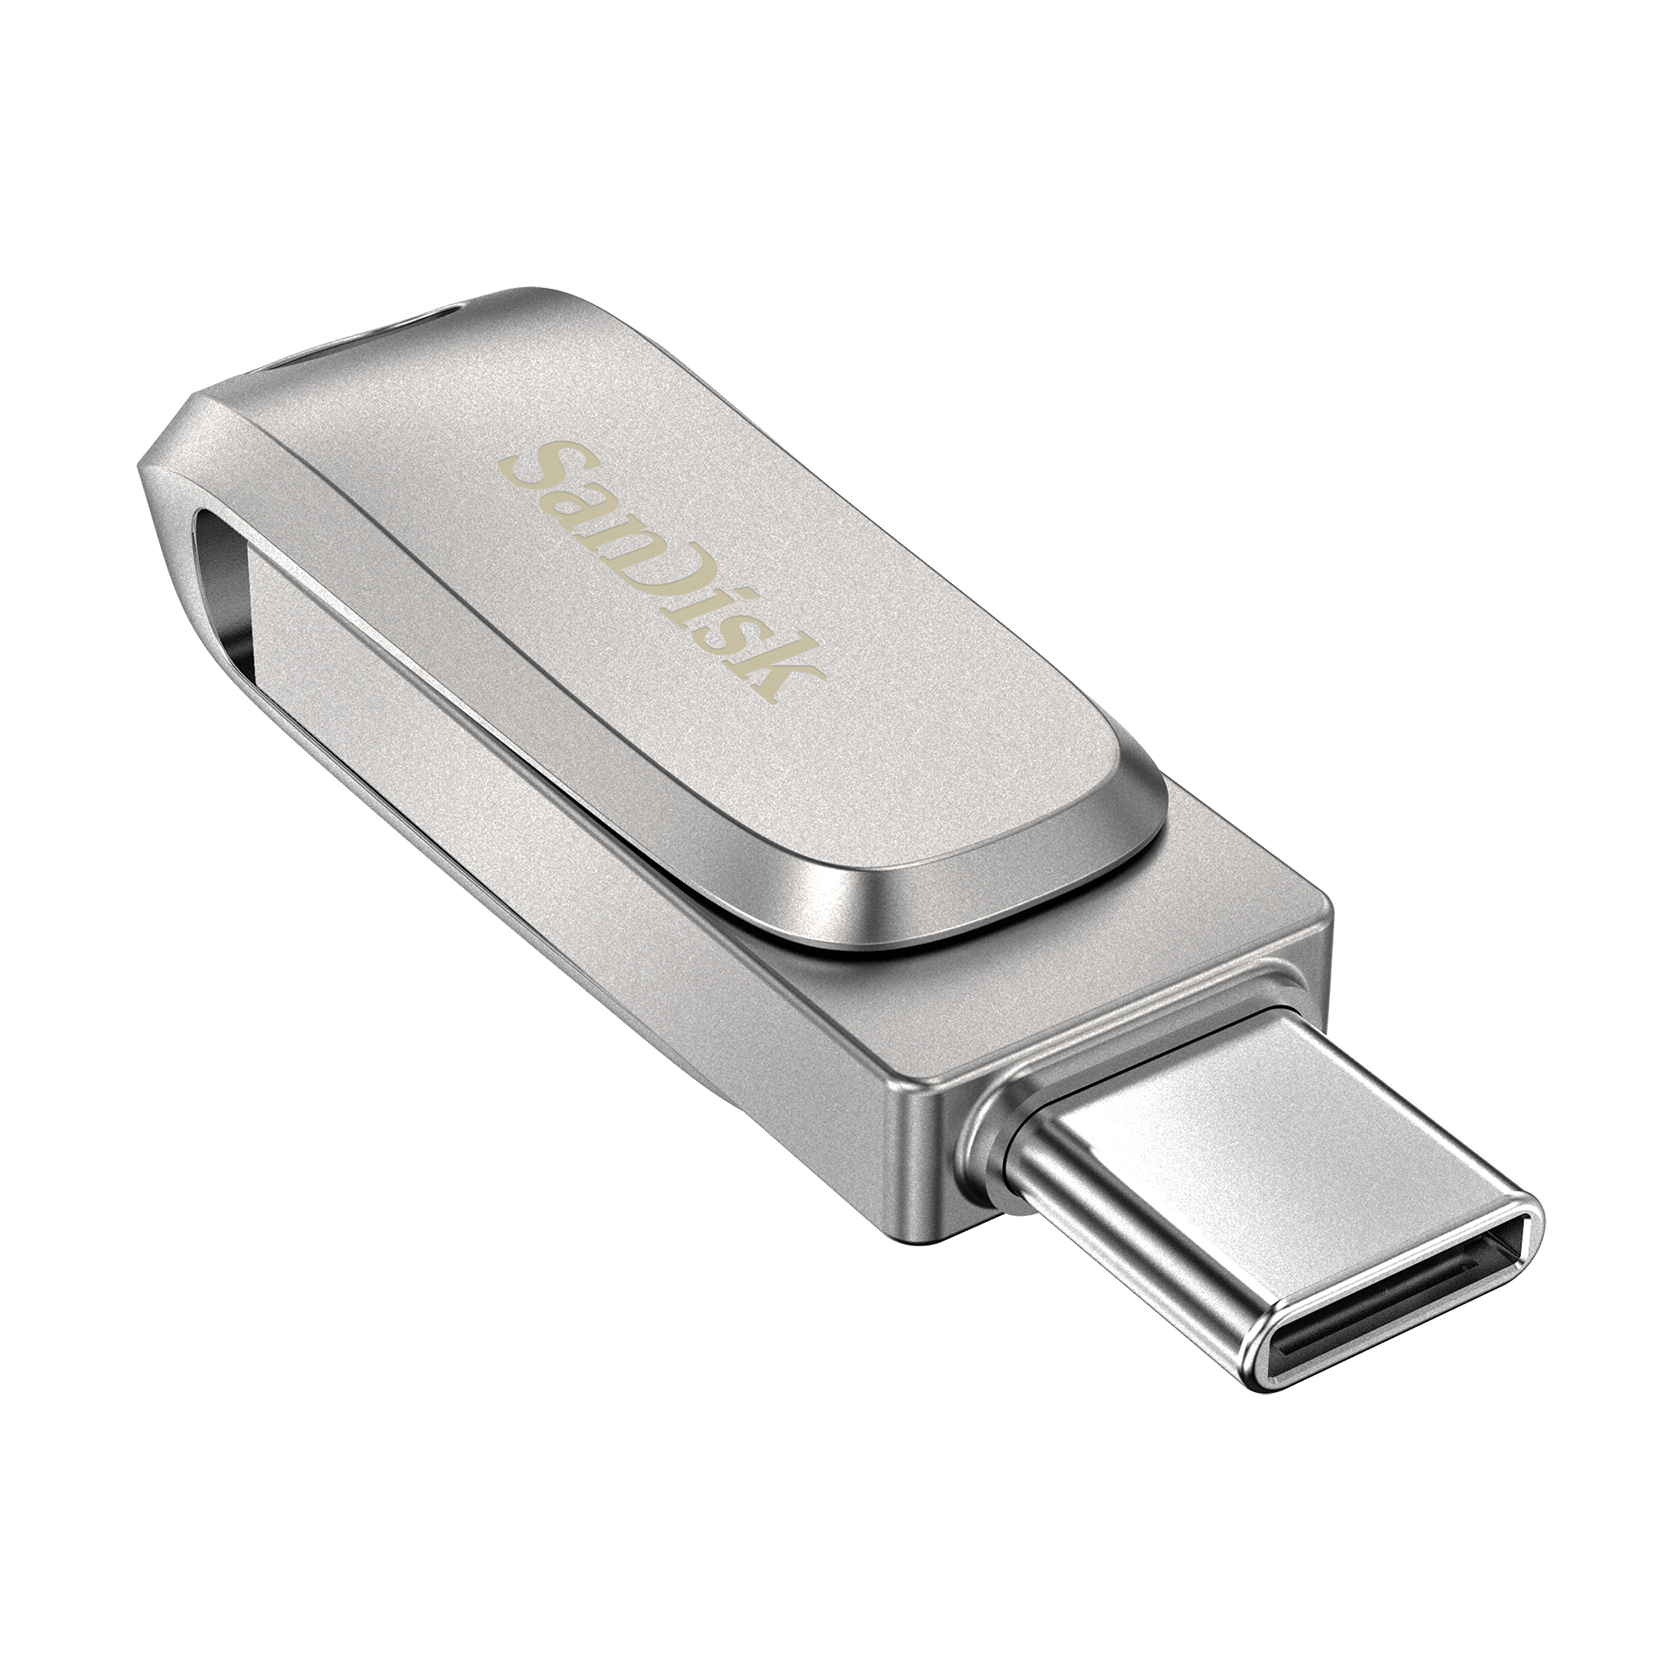 SanDisk 256GB Ultra Dual Drive Luxe USB Type-C Flash Drive - SDDDC4-256G-G46 - image 3 of 8